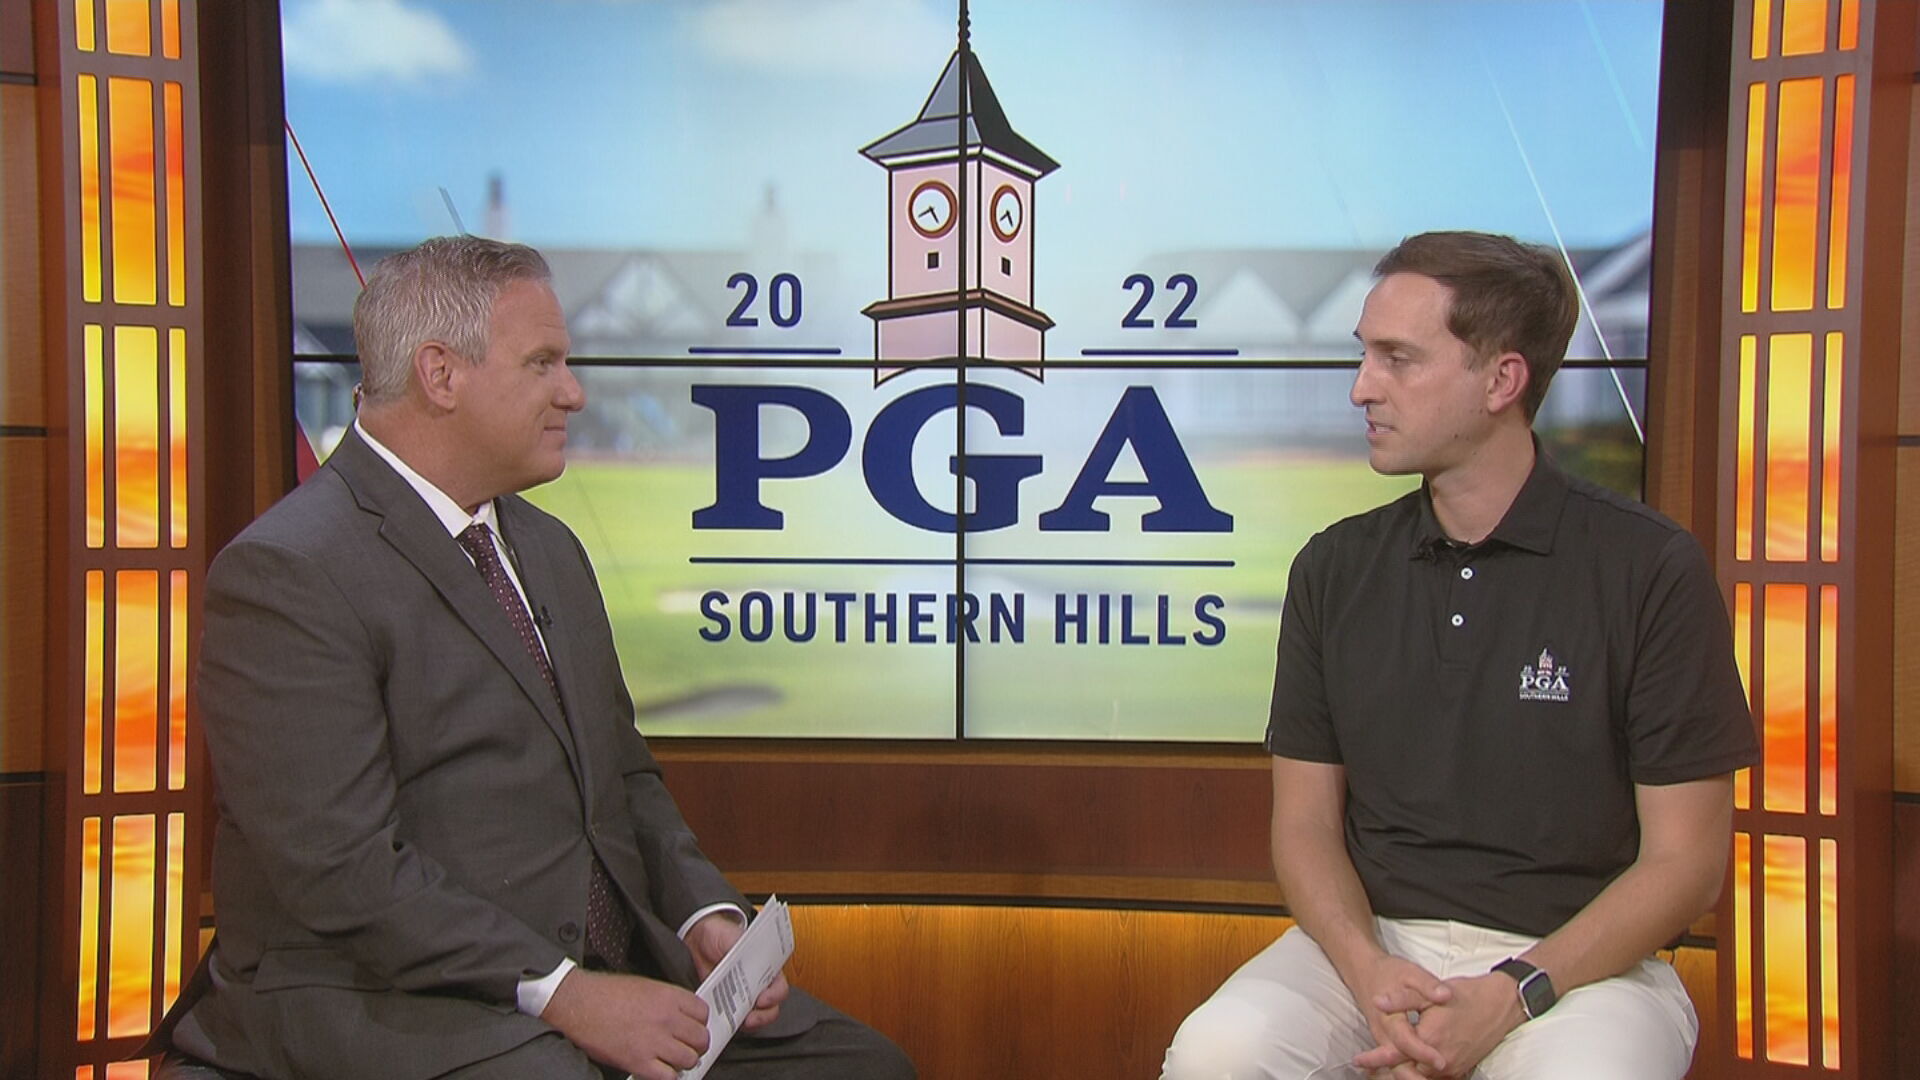 Watch: What To Know About Tickets & Volunteering For 2022 PGA Championship 